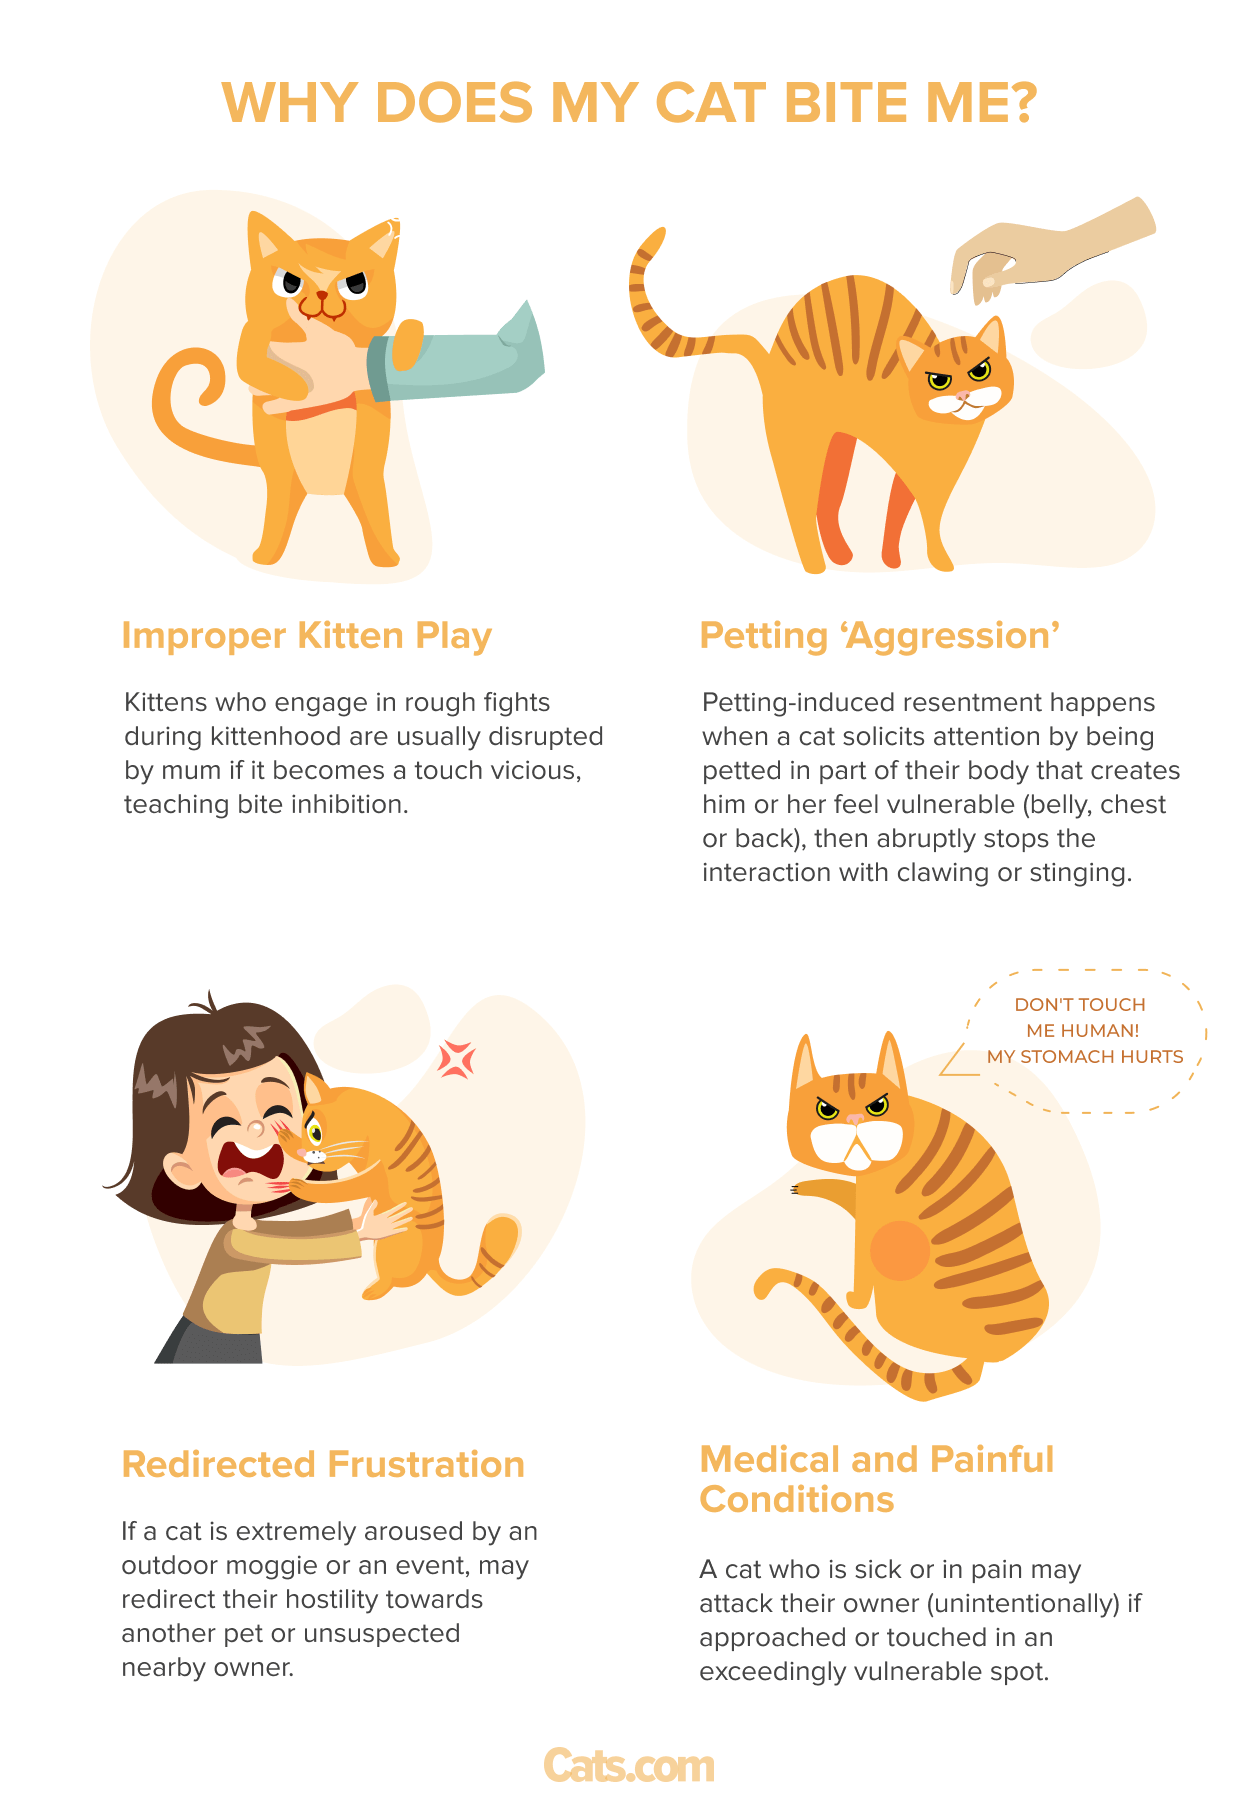 An image accompanying the question 'Why Does My Cat Bite Me?